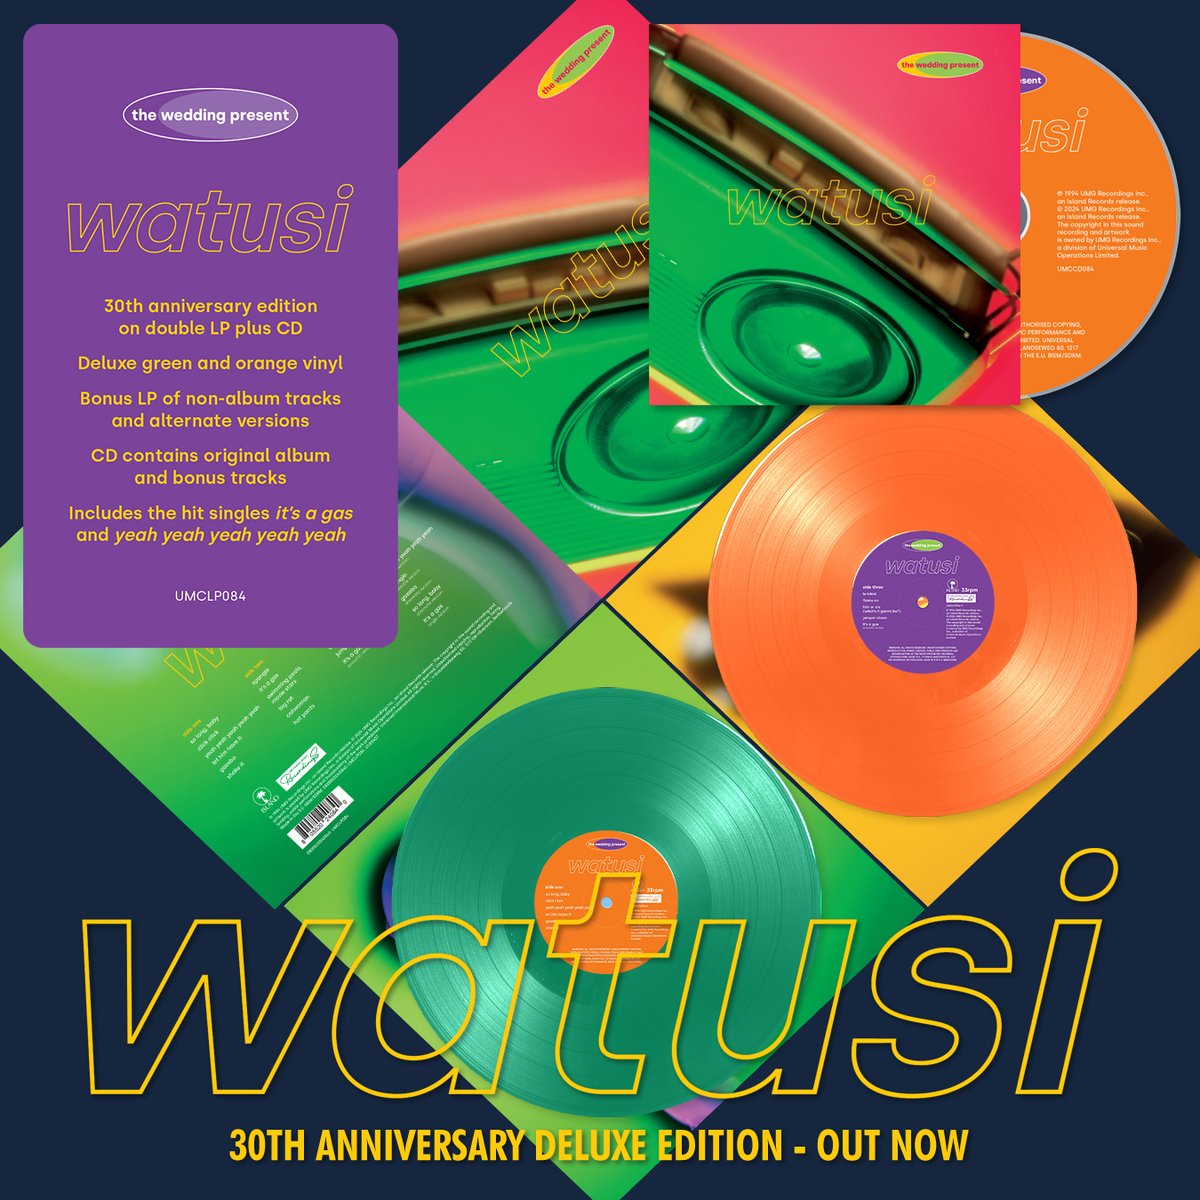 David Gedge often calls 'Watusi' The @weddingpresent's 'lost album' because it has never been quite as readily available as the others. Well, that changes today with the release of the 30th Anniversary deluxe edition - available on double LP with bonus CD: weddingpresent.lnk.to/watusideluxe